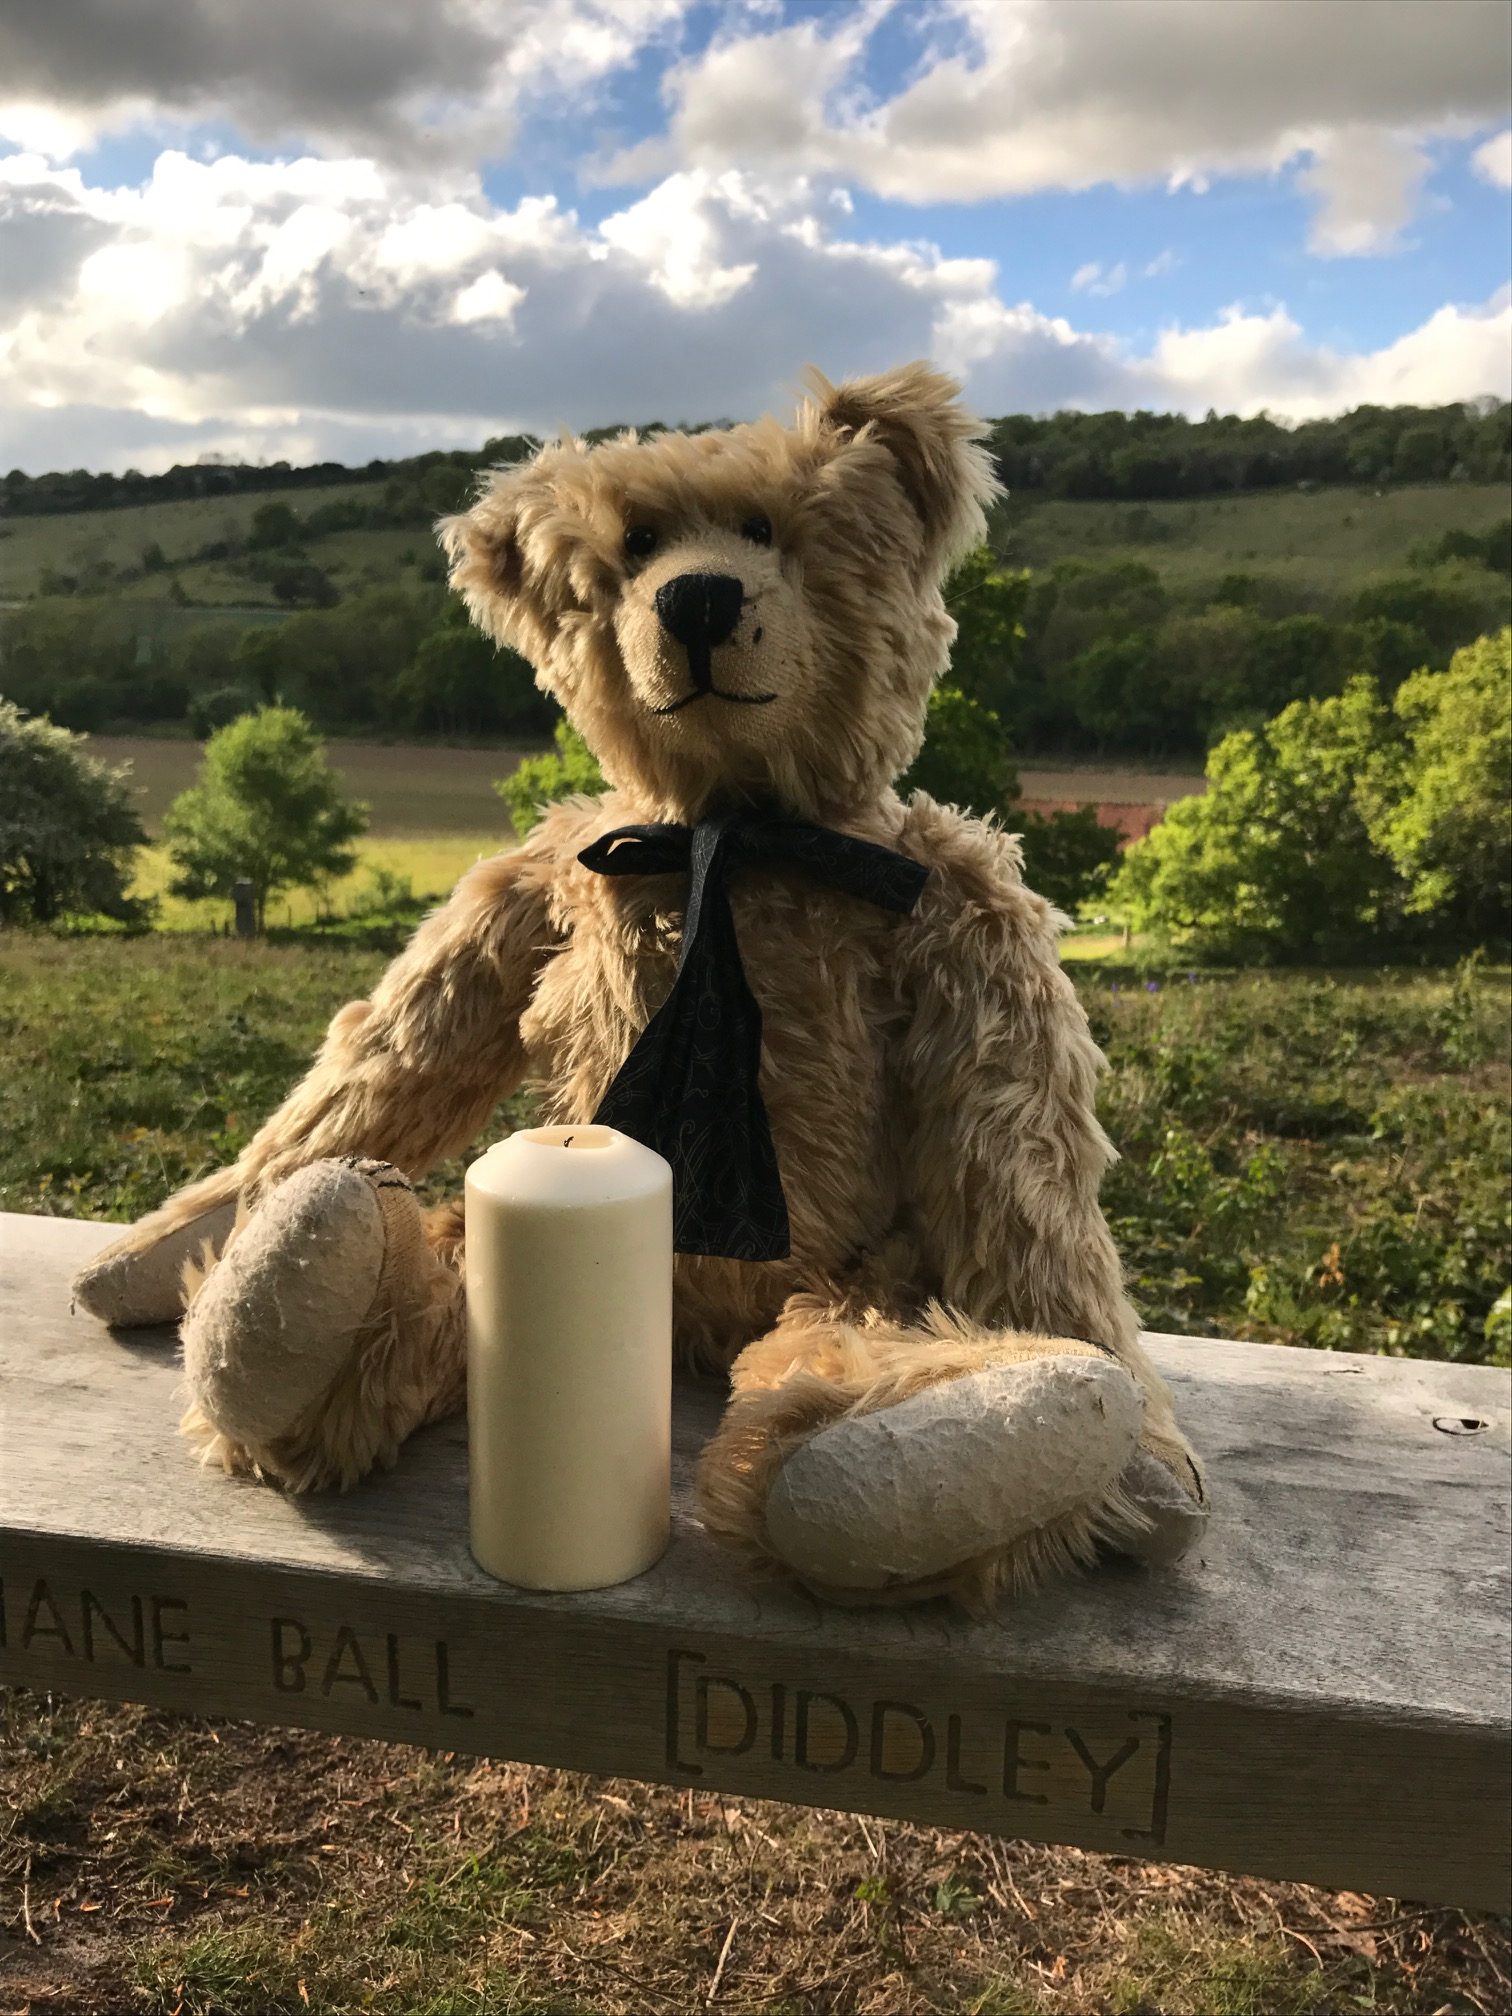 The Bench: Lighting a Candle for Diddley - On Diddley’s Bench… looking across to “Diddley’s View’.